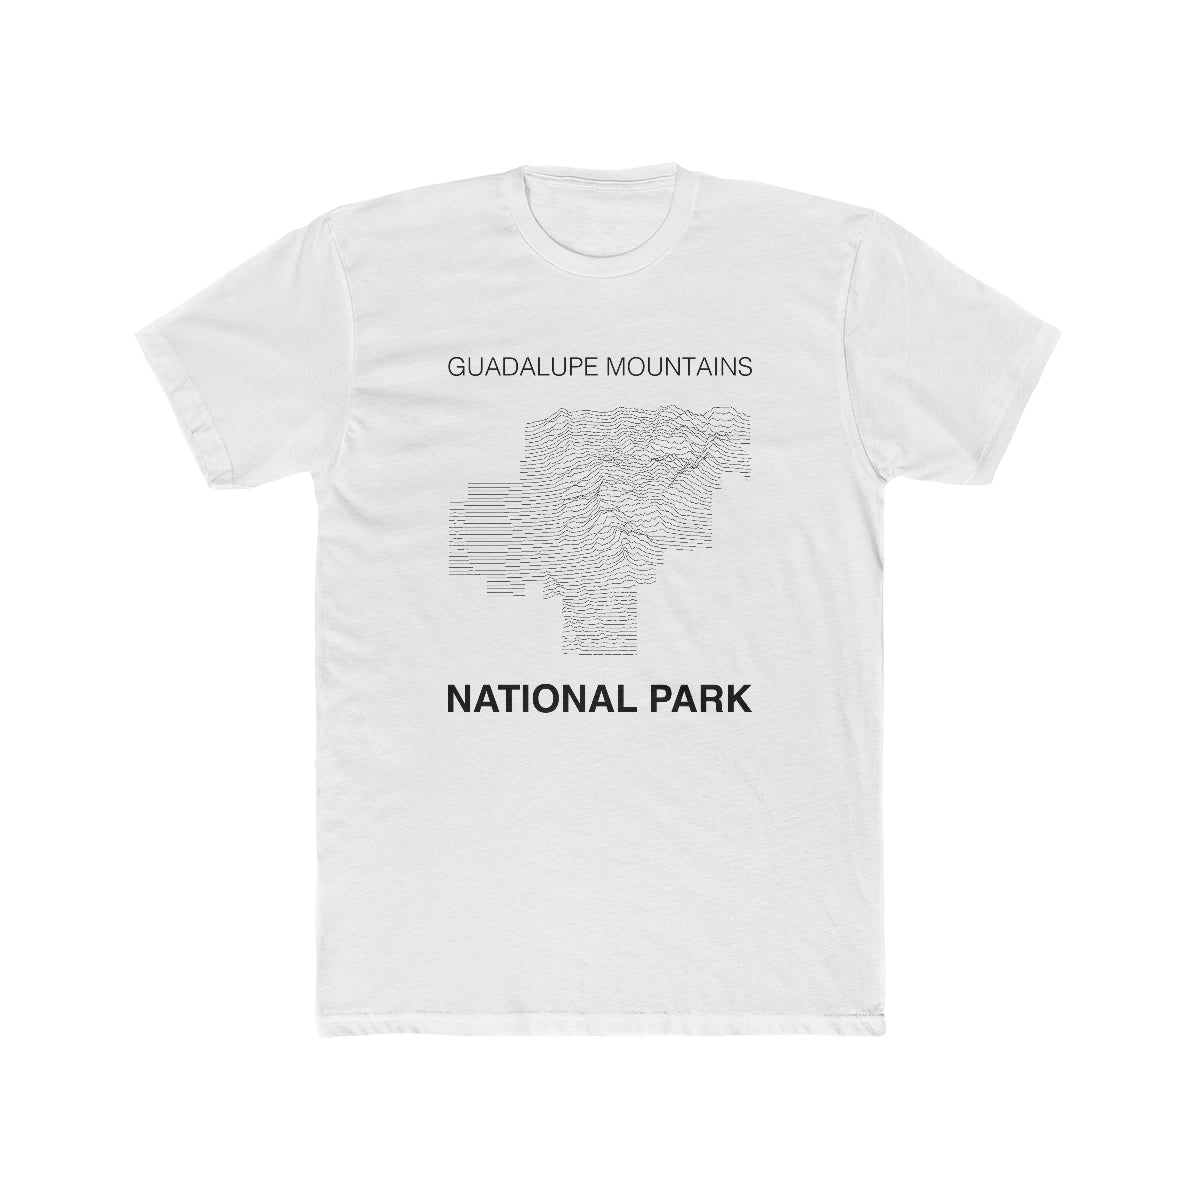 Guadalupe Mountains National Park T-Shirt Lines